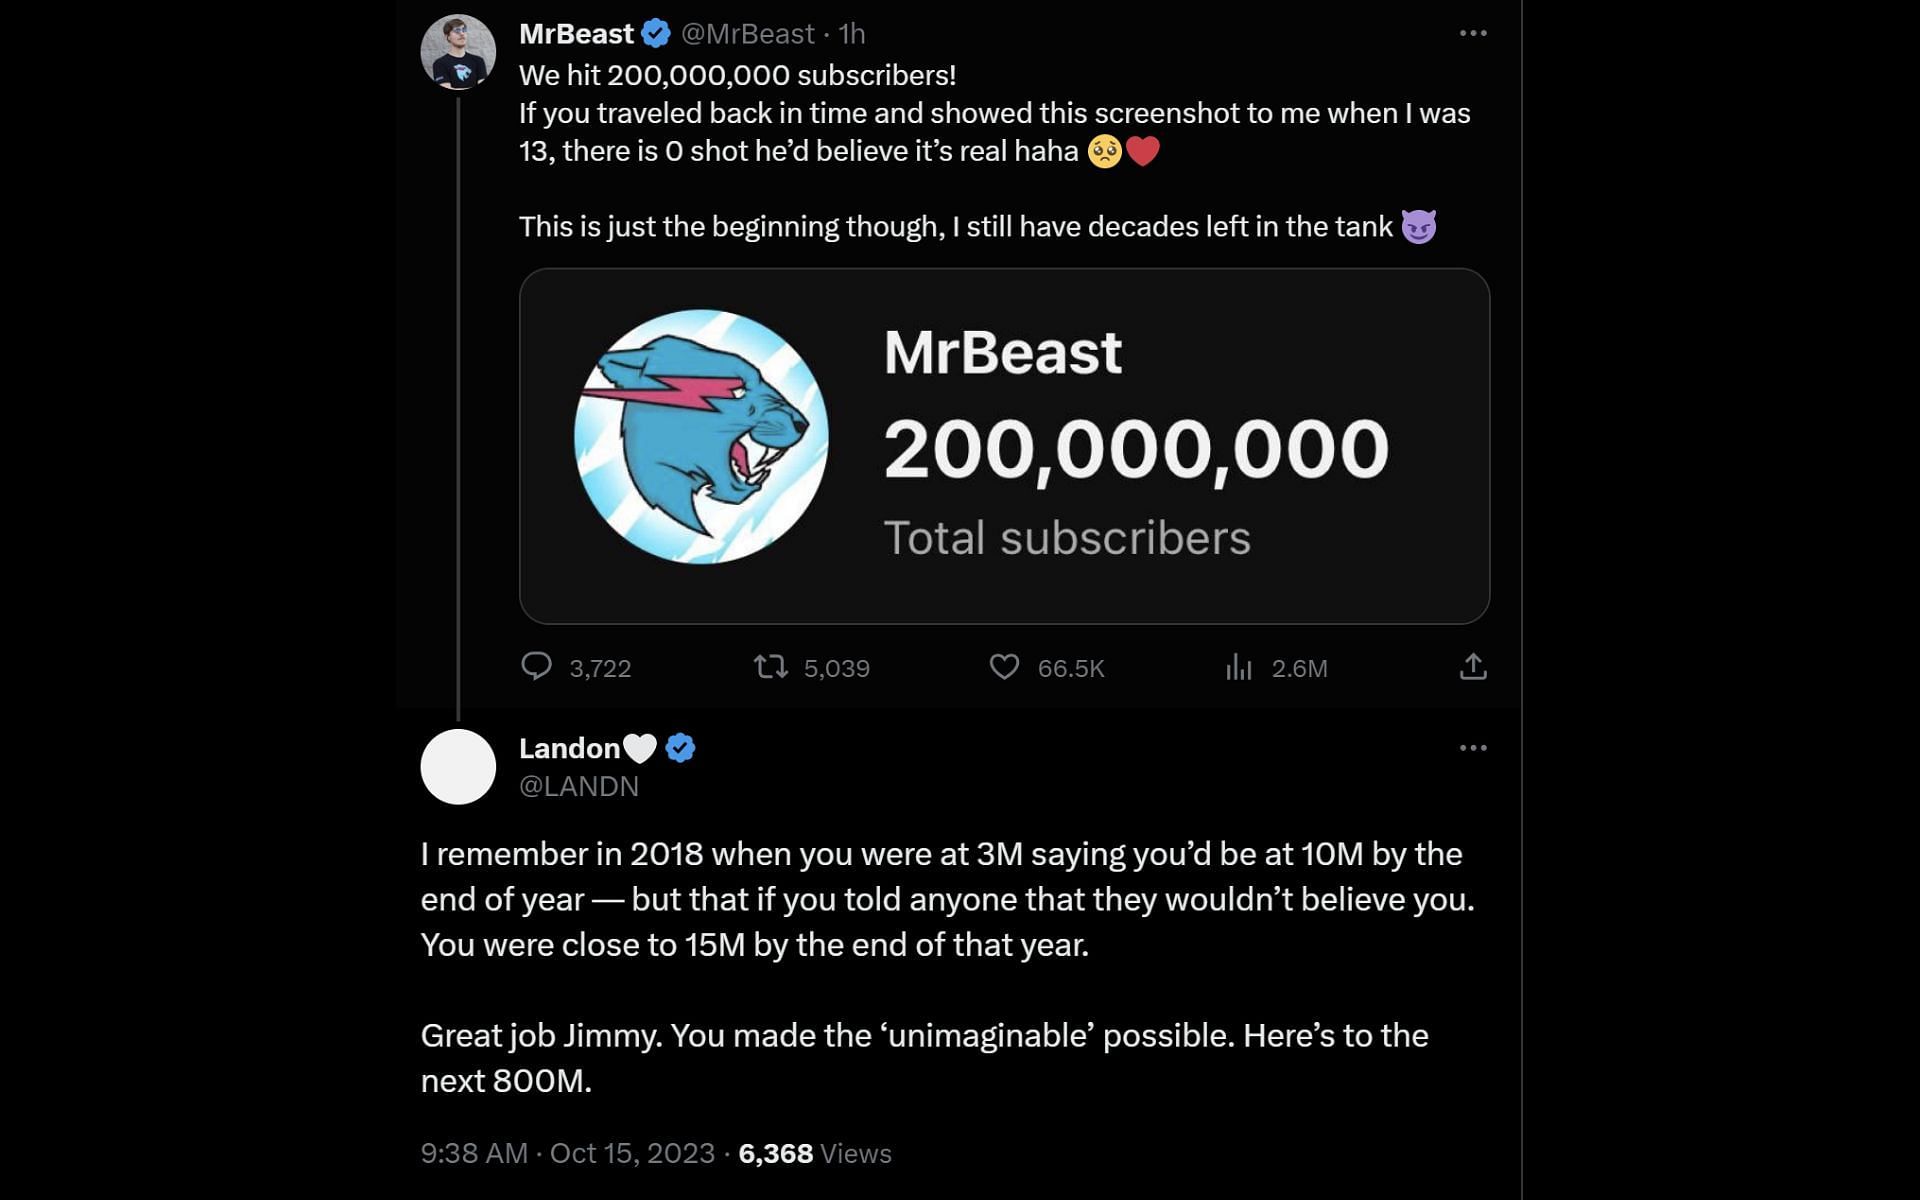 MrBeast on X: We hit 200,000,000 subscribers! If you traveled